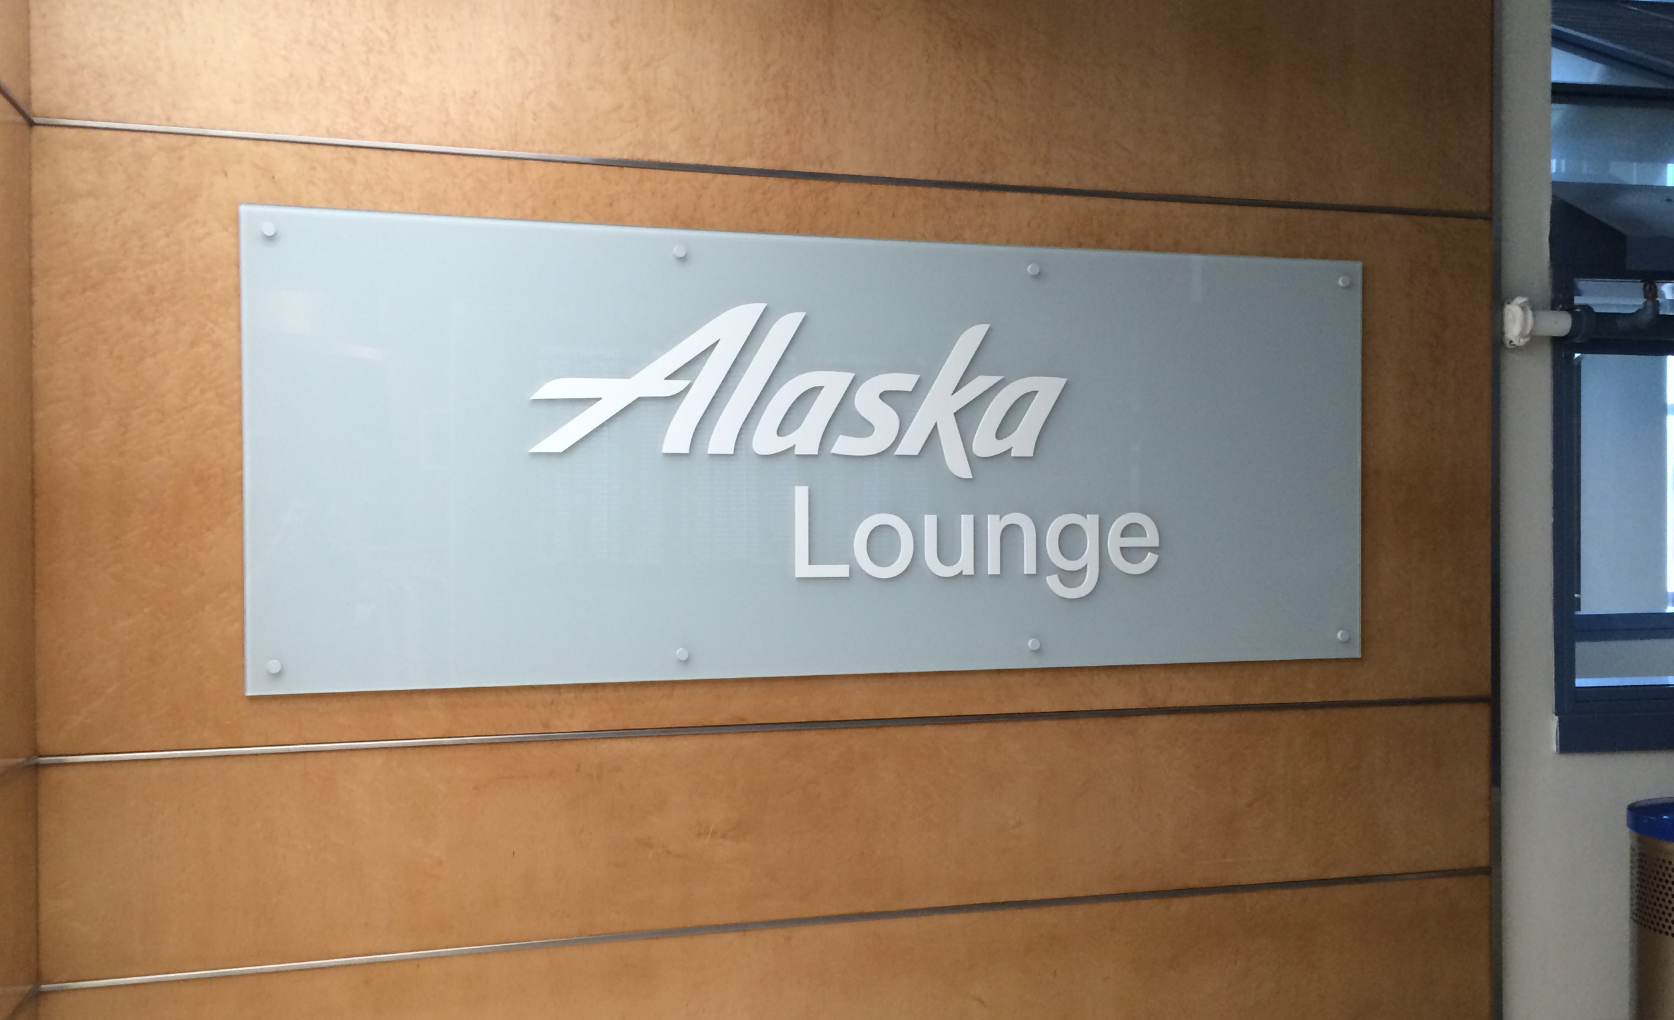 Priority Pass Lounge Review: Alaska Lounge LAX Airport - Points Miles & Martinis1674 x 1020